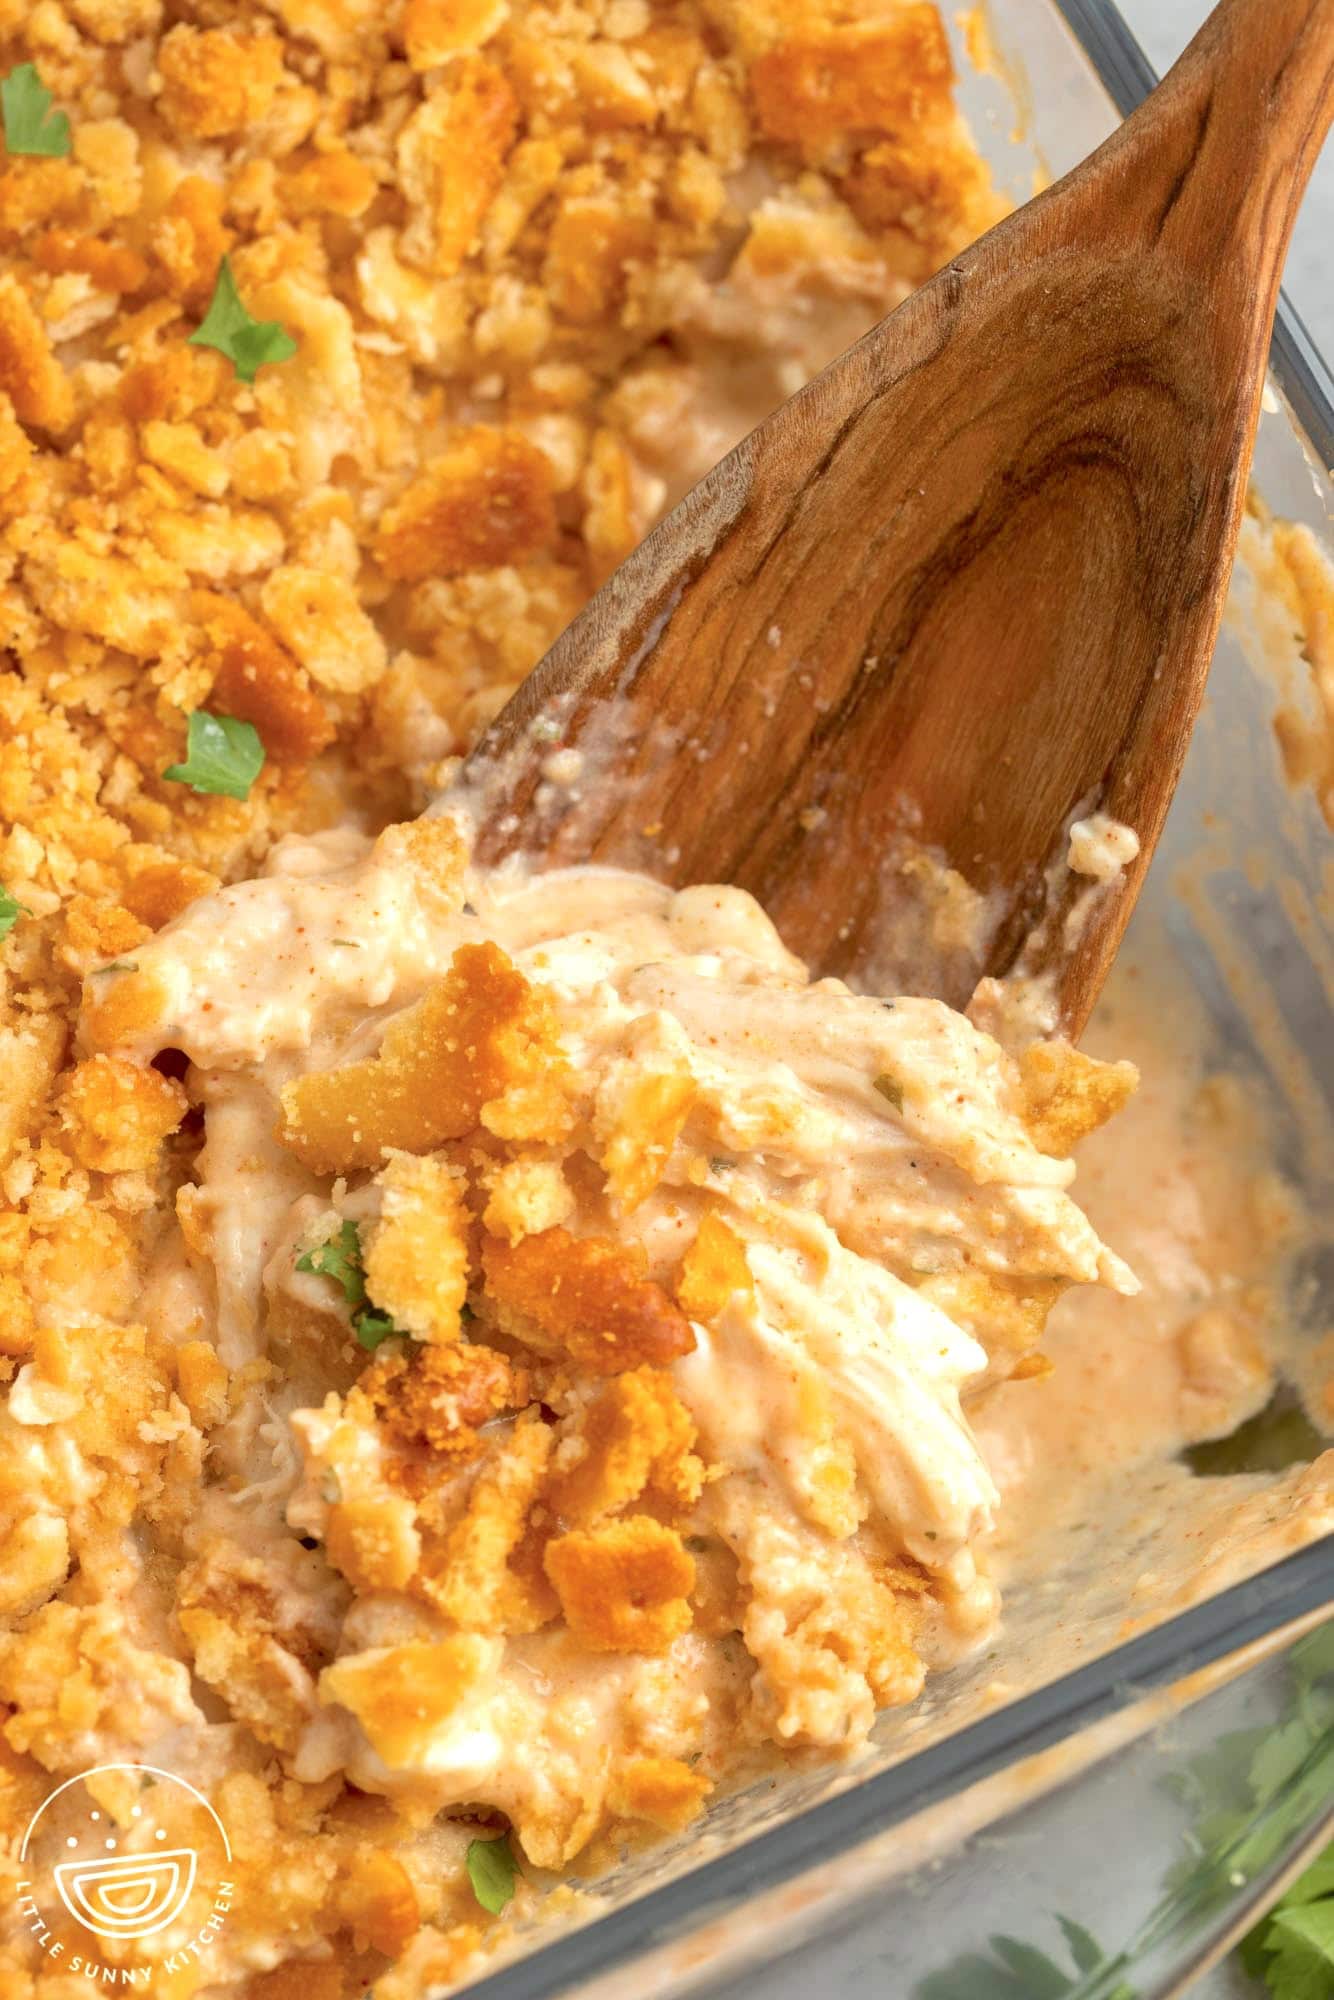 Close-up of an easy dinner idea: a casserole dish with creamy chicken mixture topped with crumbled golden brown biscuits, garnished with green onions, and a wooden spoon scooping out a serving